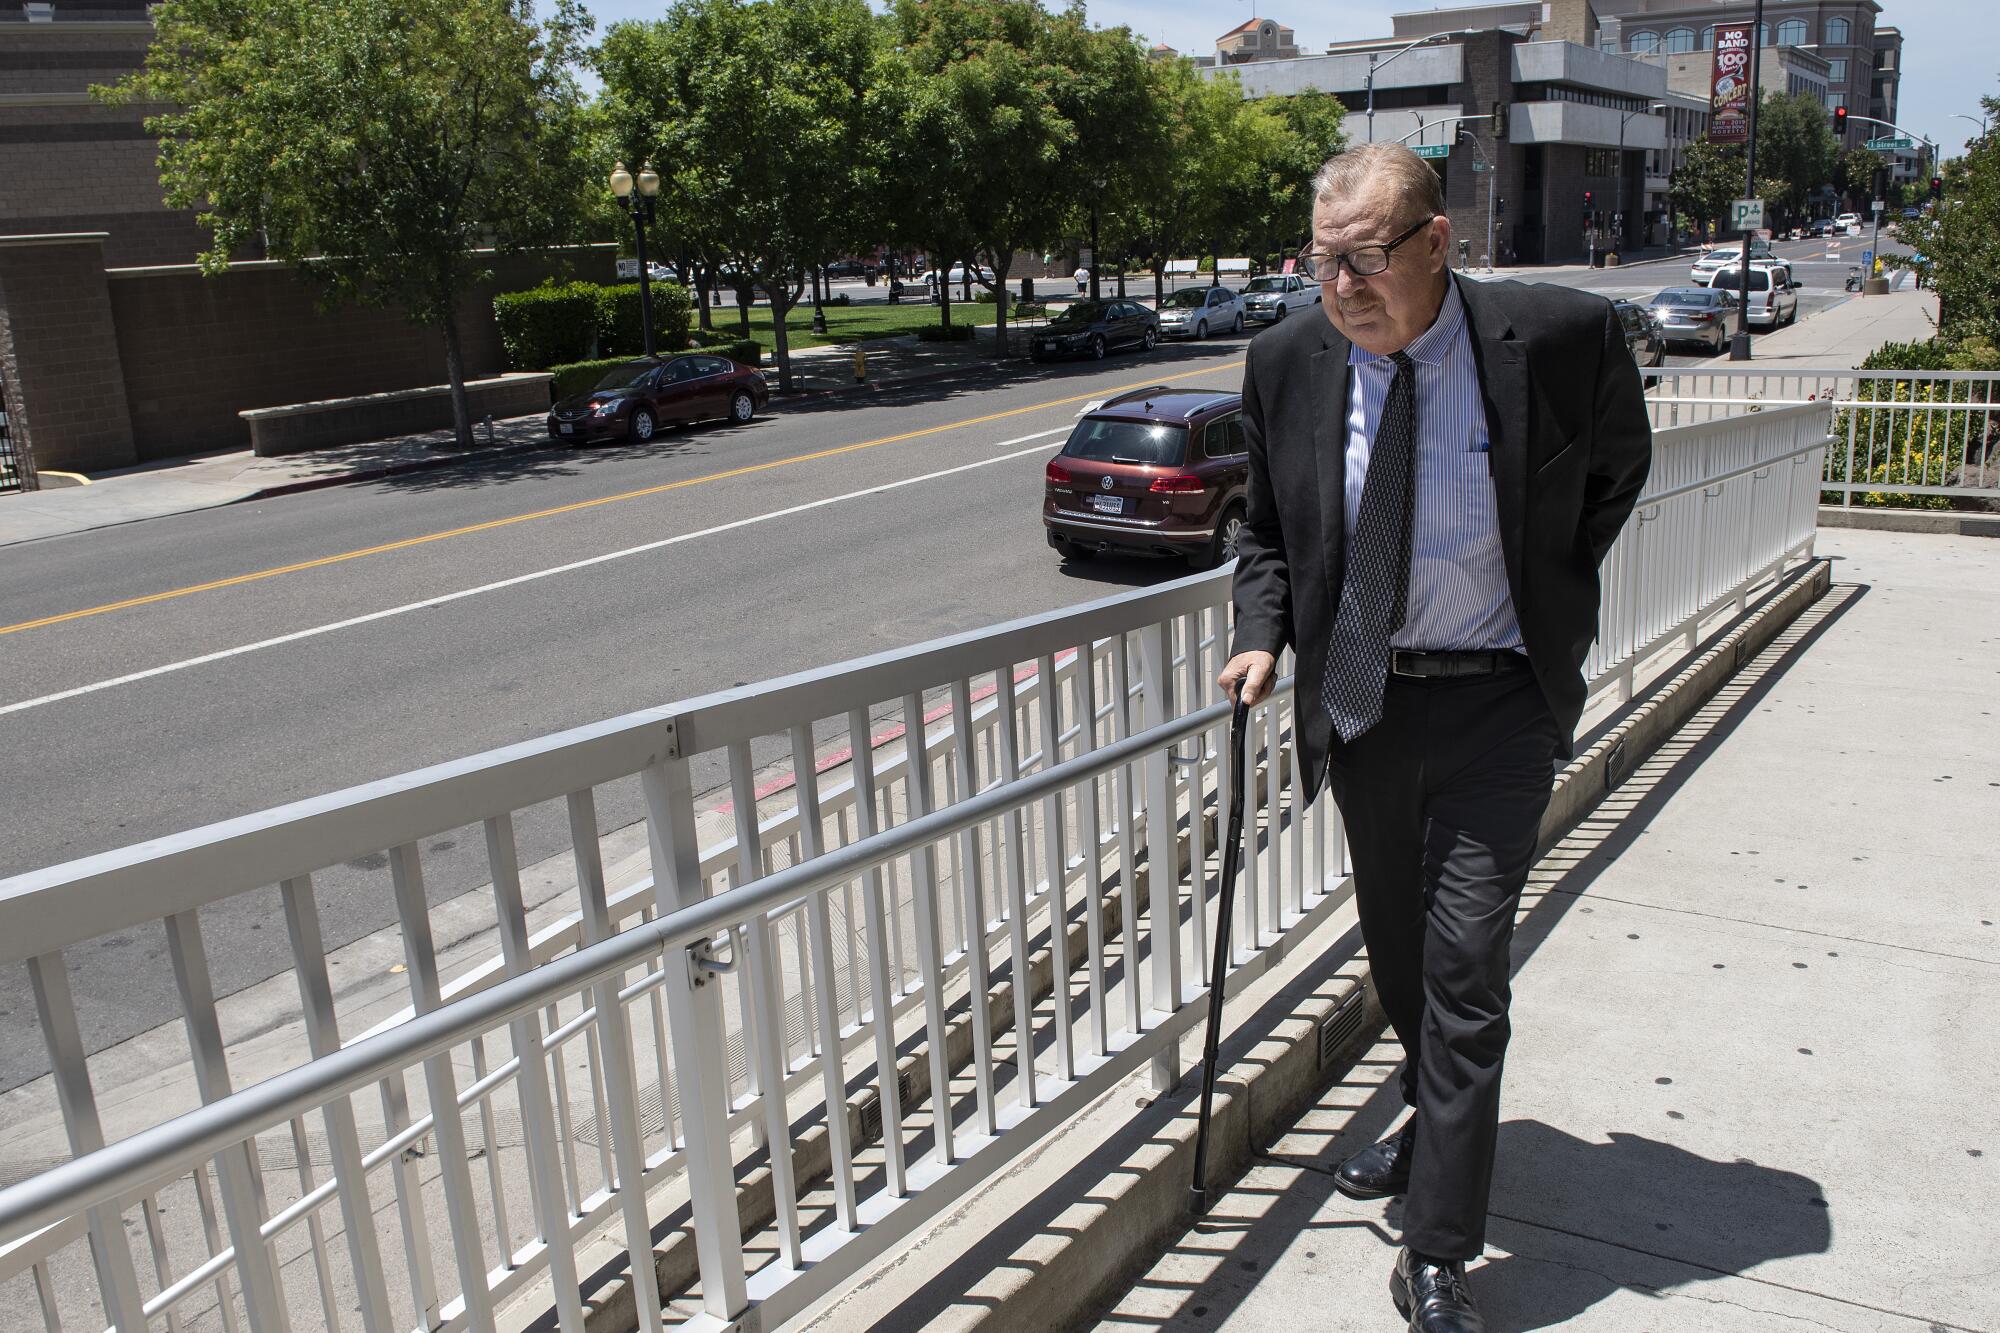 Modesto attorney Frank Carson walks with a cane on a ramp to court.